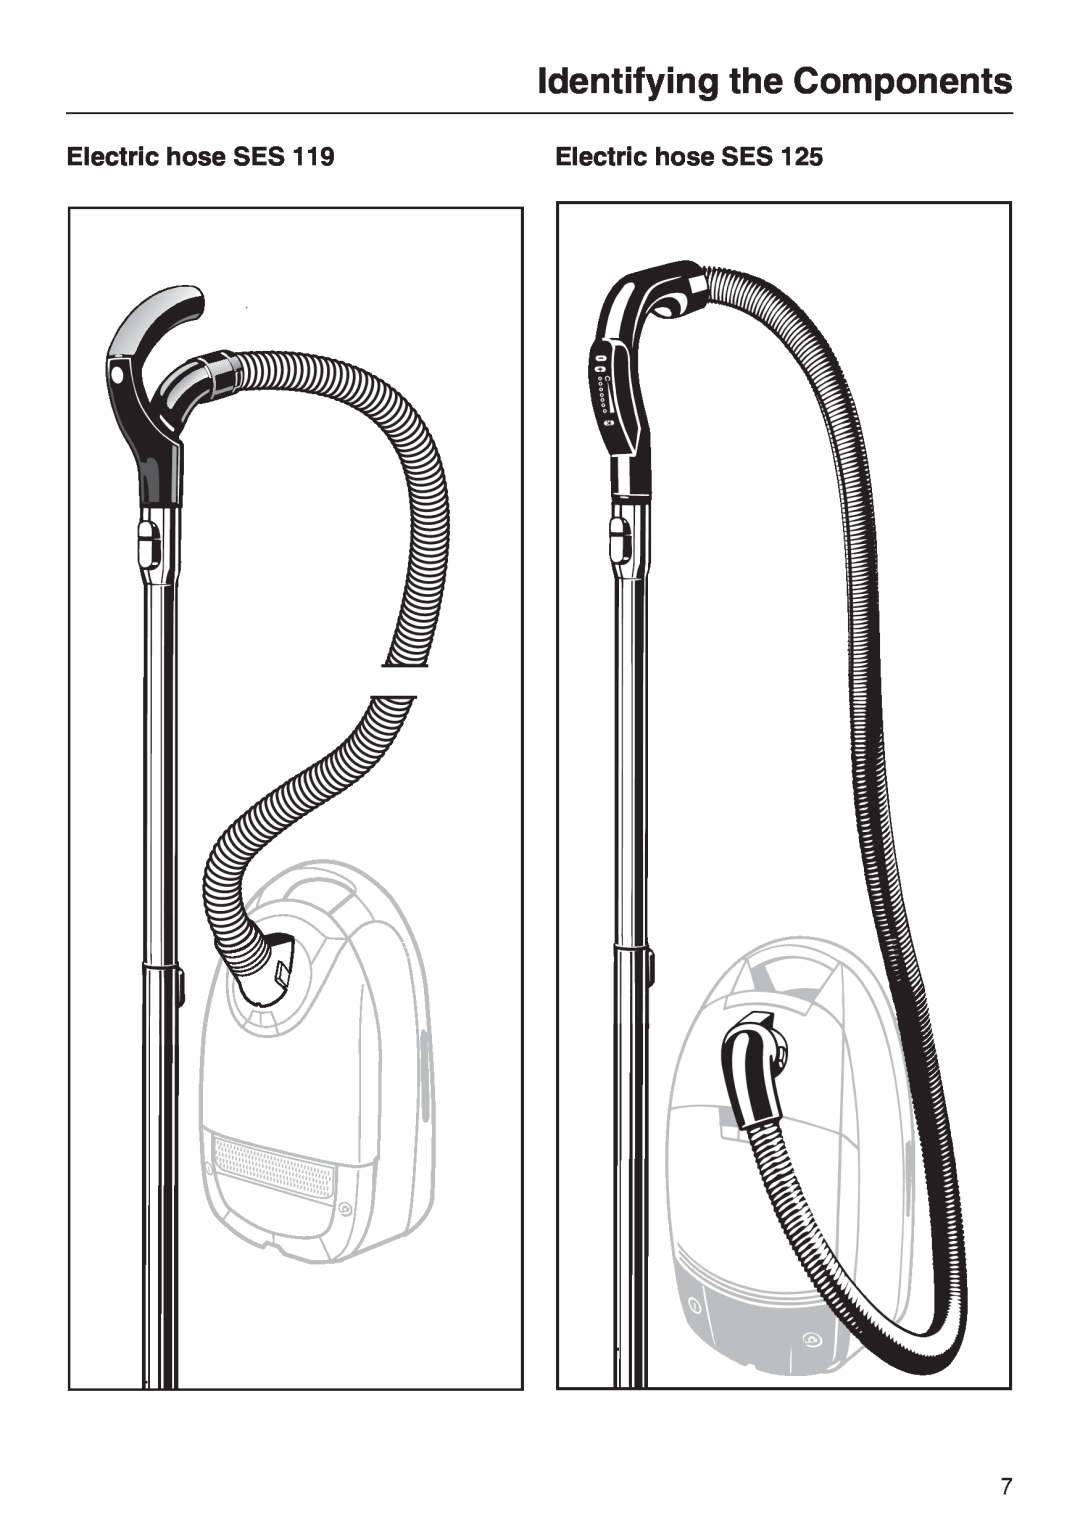 Miele 213-2, 217-3, 217-2 operating instructions Identifying the Components, Electric hose SES 